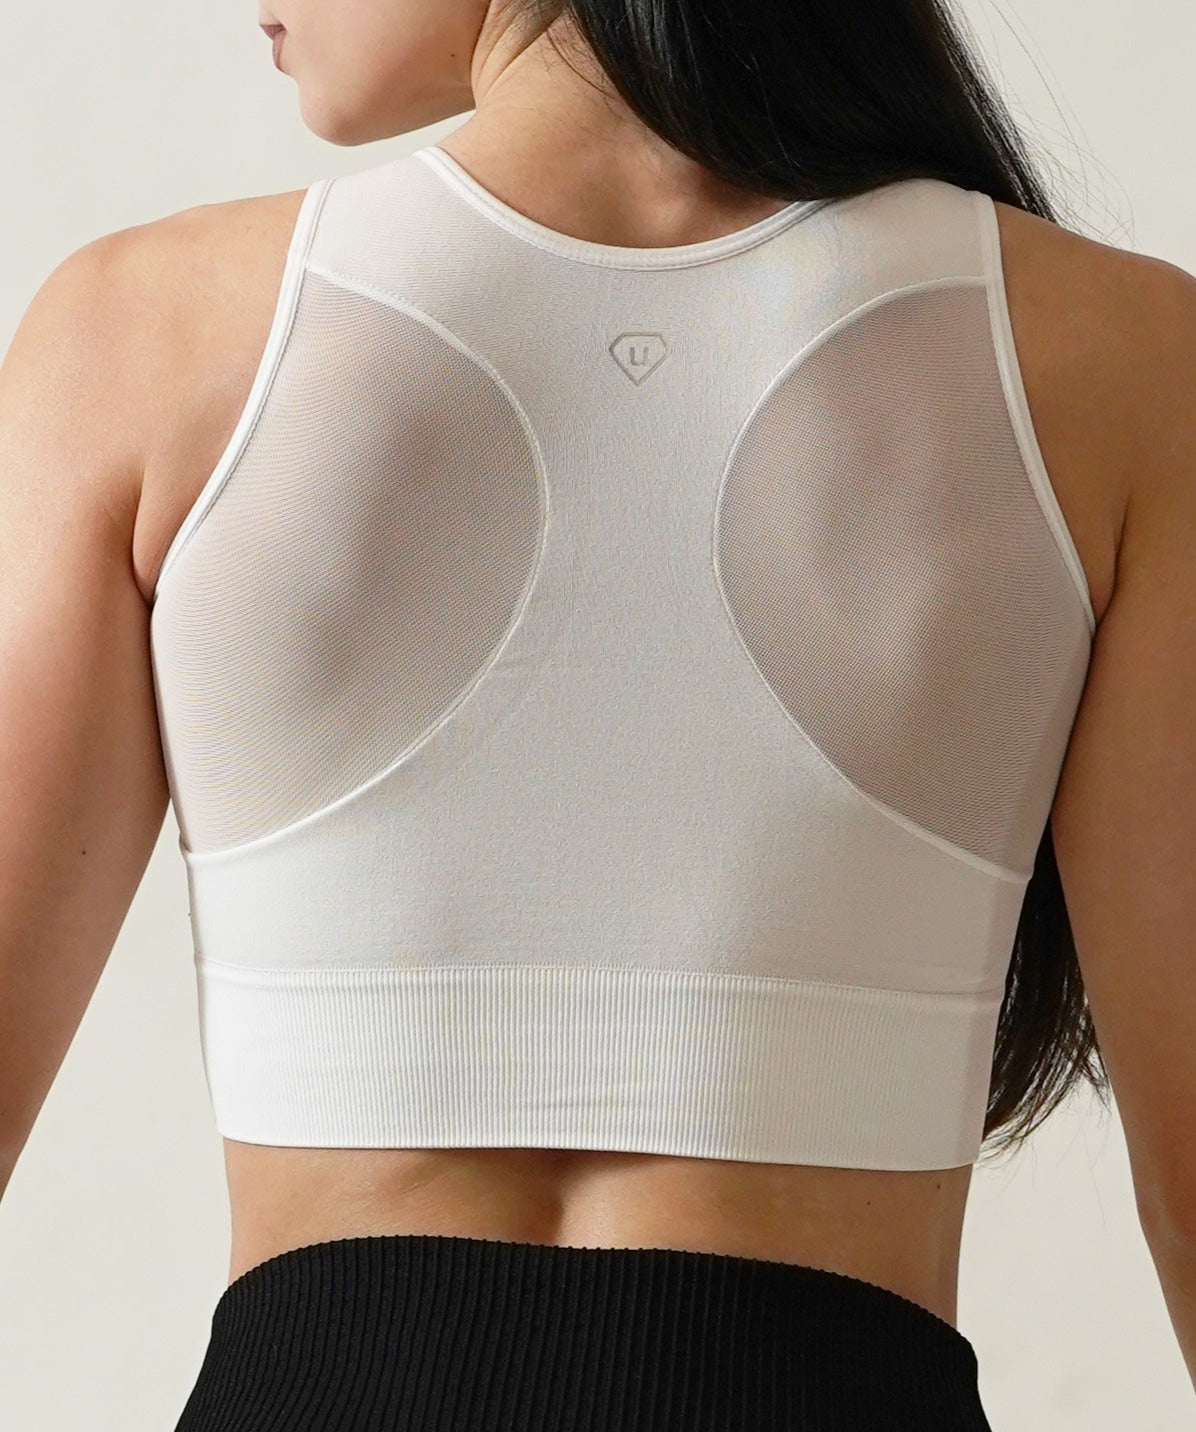 Equinox Crop Top with Transparent Mesh in White